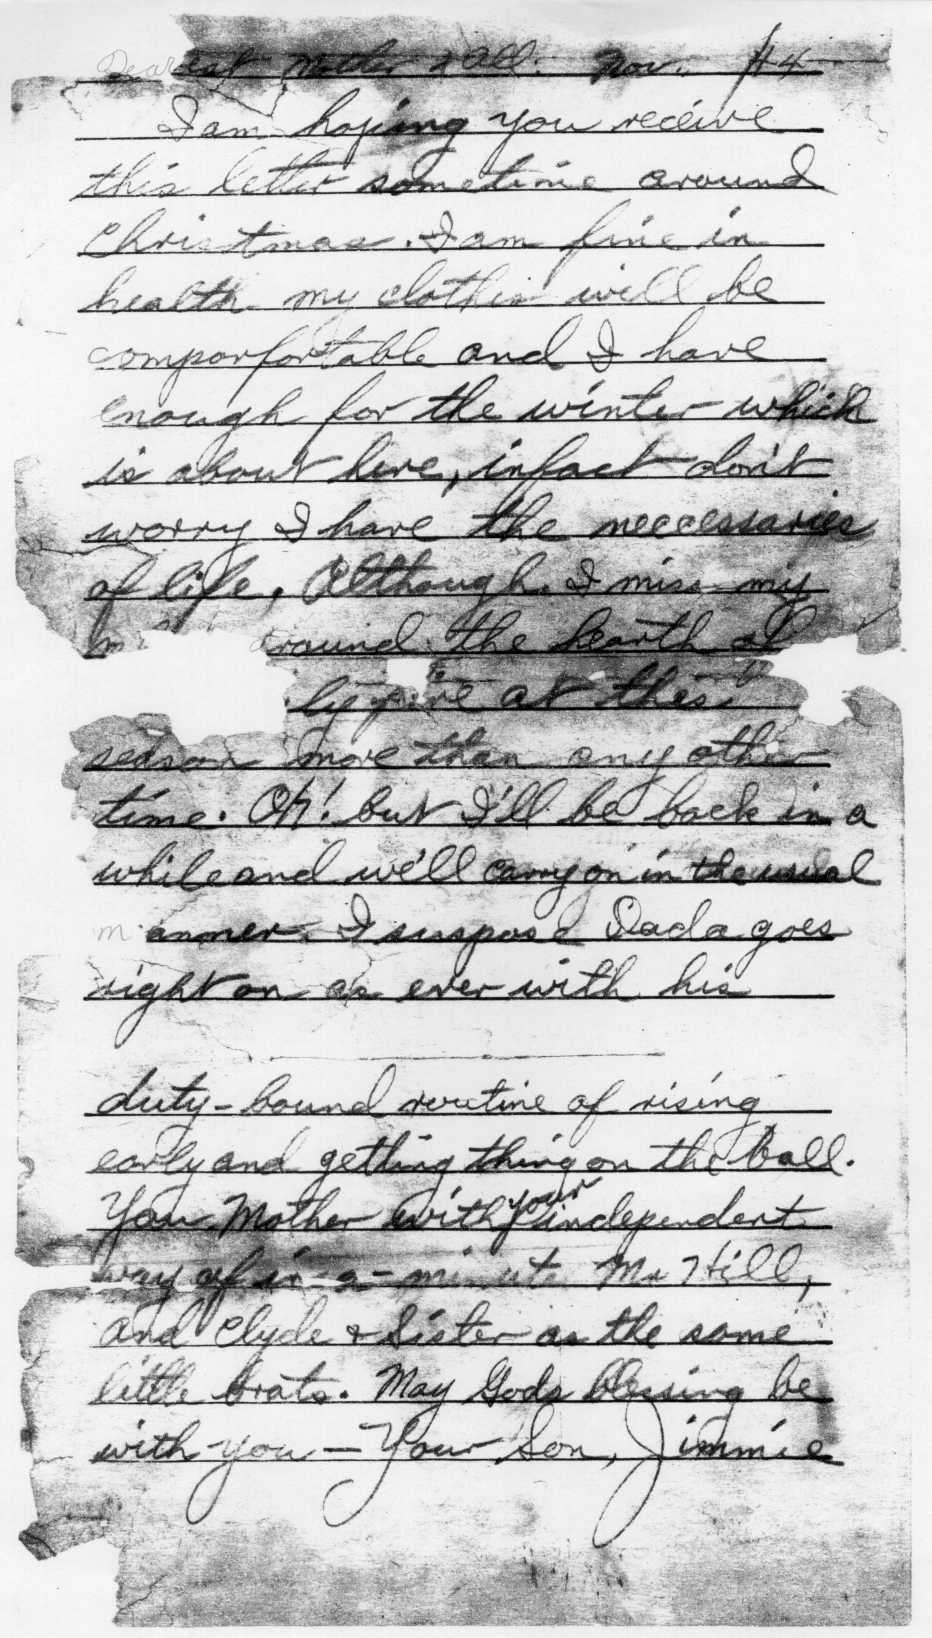 Letter from Stalag IIb